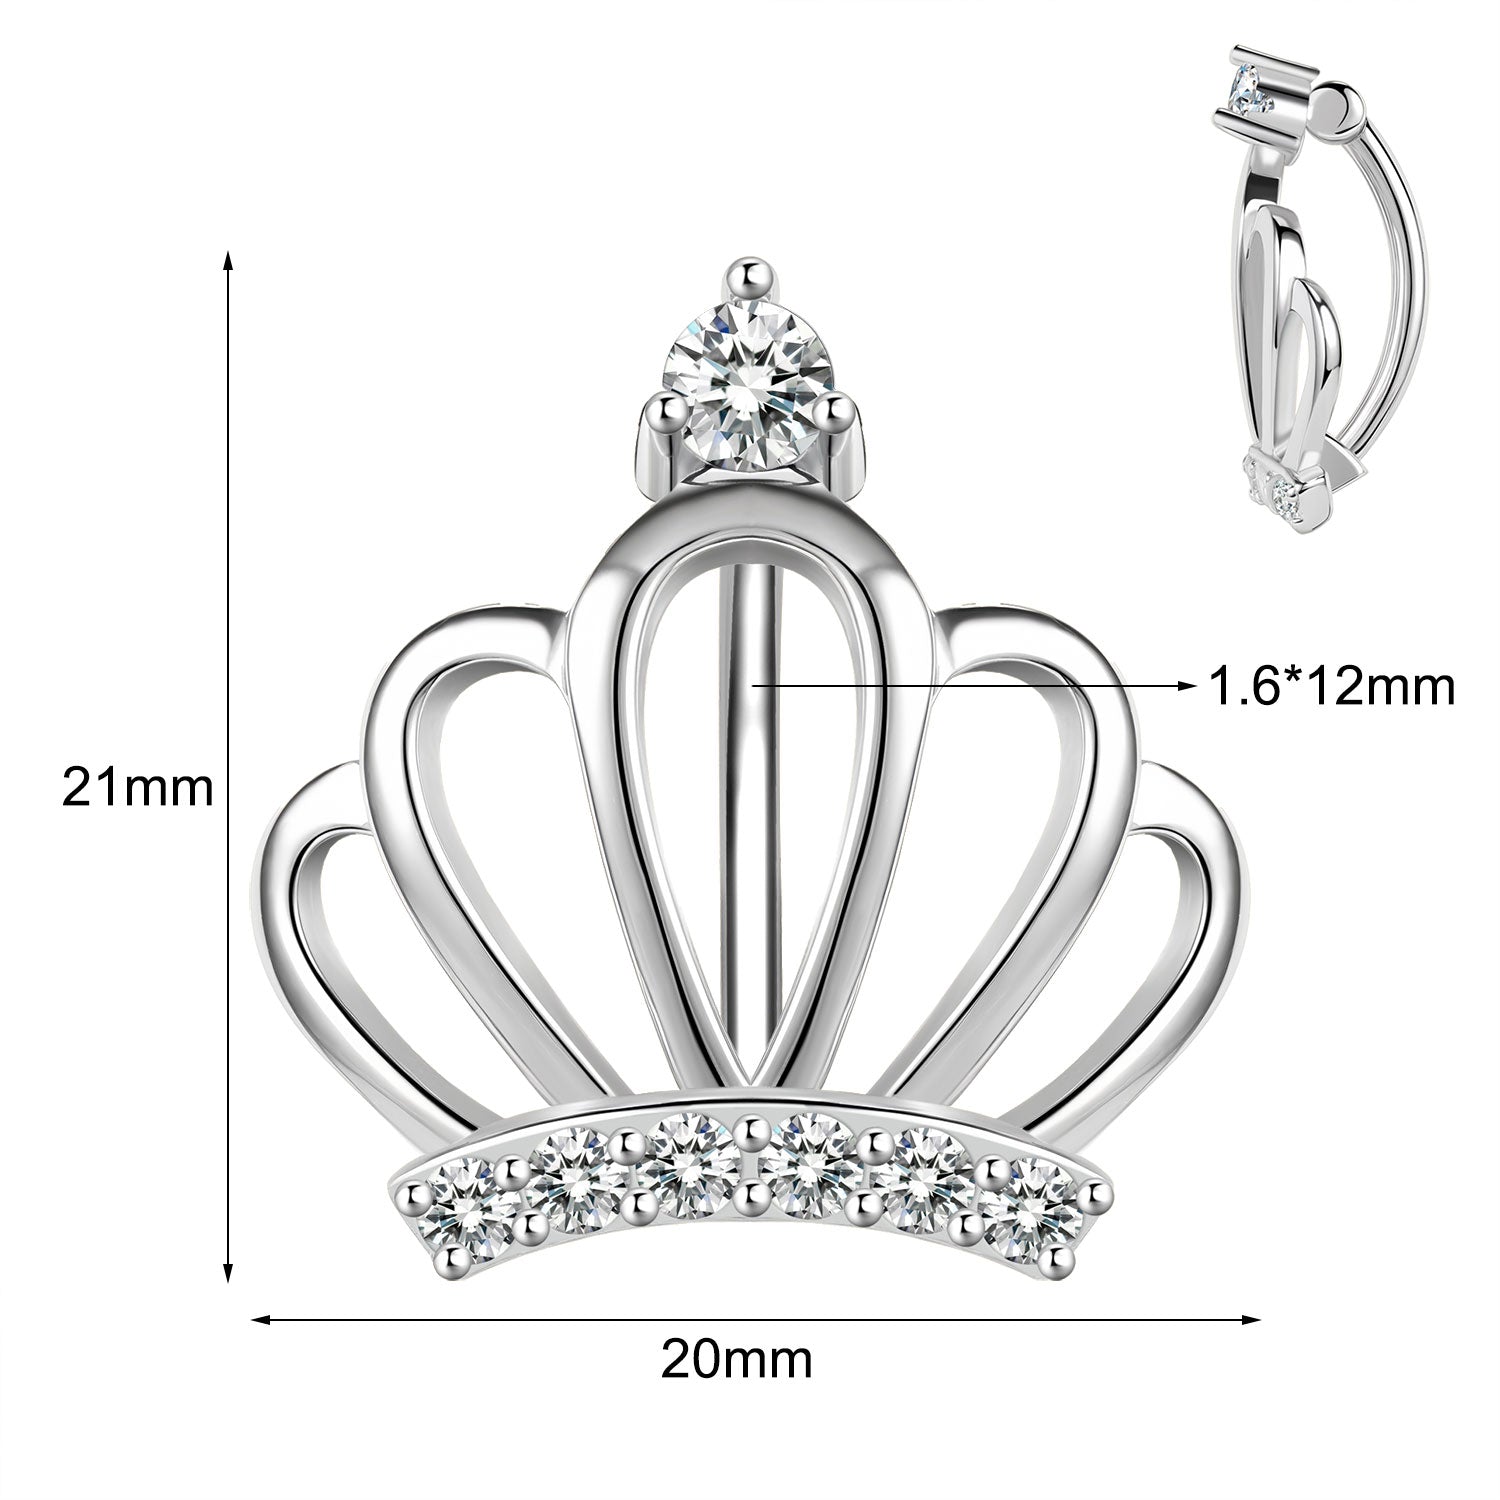 14G 925 Sterling Silver Crown Belly Navel Rings Clear Zircon Belly Button Rings